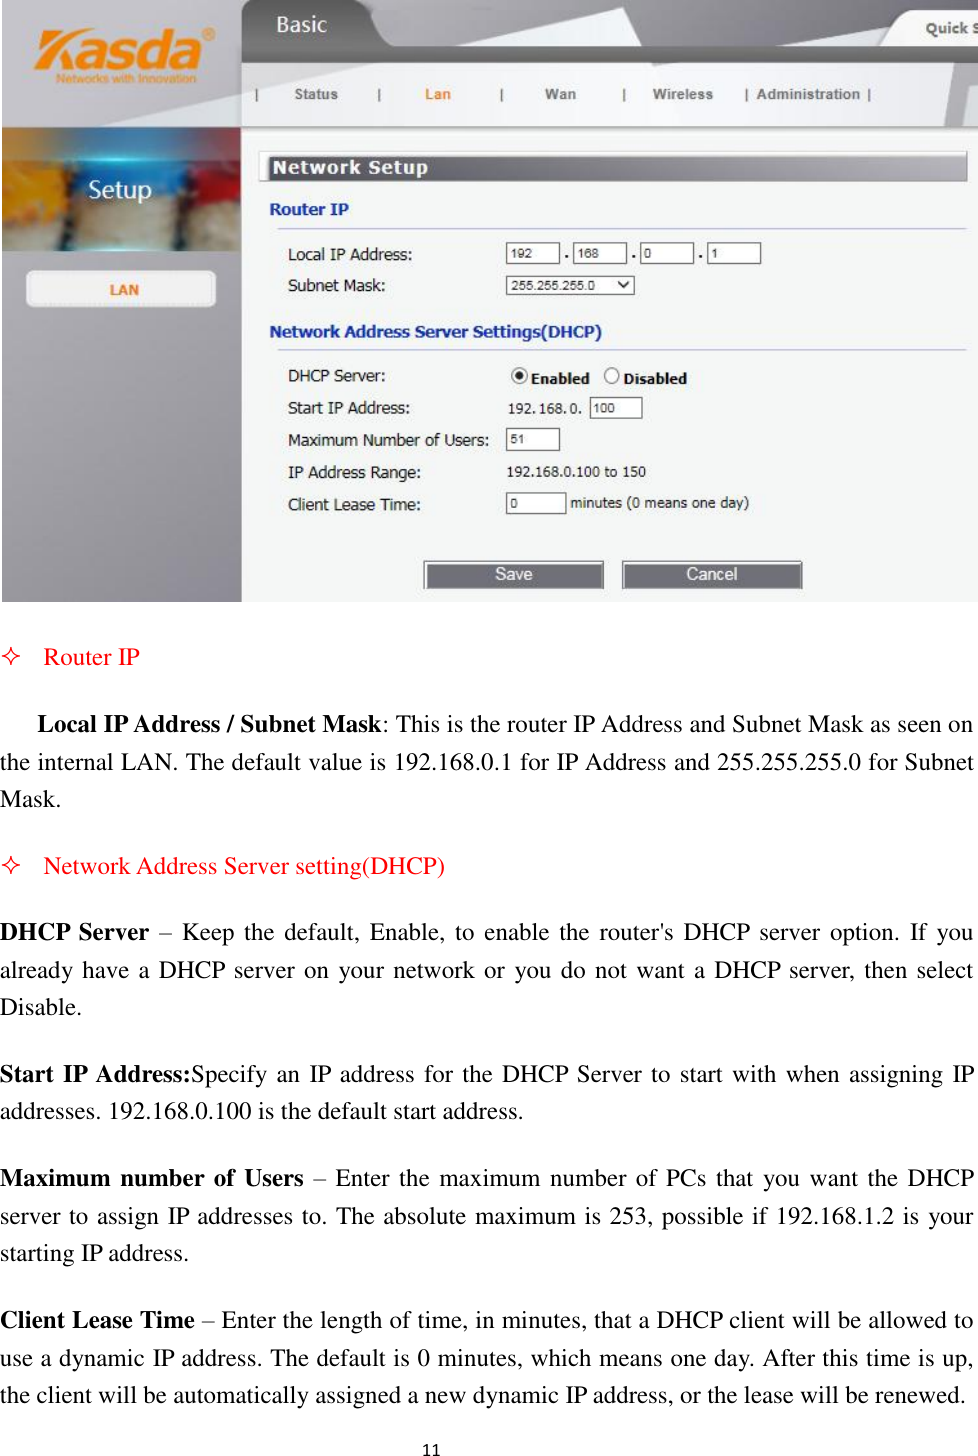                                                               11                                                       Router IP Local IP Address / Subnet Mask: This is the router IP Address and Subnet Mask as seen on the internal LAN. The default value is 192.168.0.1 for IP Address and 255.255.255.0 for Subnet Mask.  Network Address Server setting(DHCP) DHCP Server – Keep the  default, Enable, to  enable the router&apos;s DHCP server option.  If  you already have a DHCP server on your network or you do not want a DHCP server, then select Disable. Start IP Address:Specify an IP address for the DHCP Server to start with when assigning IP addresses. 192.168.0.100 is the default start address.   Maximum number of Users – Enter the maximum number of PCs that you want the DHCP server to assign IP addresses to. The absolute maximum is 253, possible if 192.168.1.2 is your starting IP address. Client Lease Time – Enter the length of time, in minutes, that a DHCP client will be allowed to use a dynamic IP address. The default is 0 minutes, which means one day. After this time is up, the client will be automatically assigned a new dynamic IP address, or the lease will be renewed.   